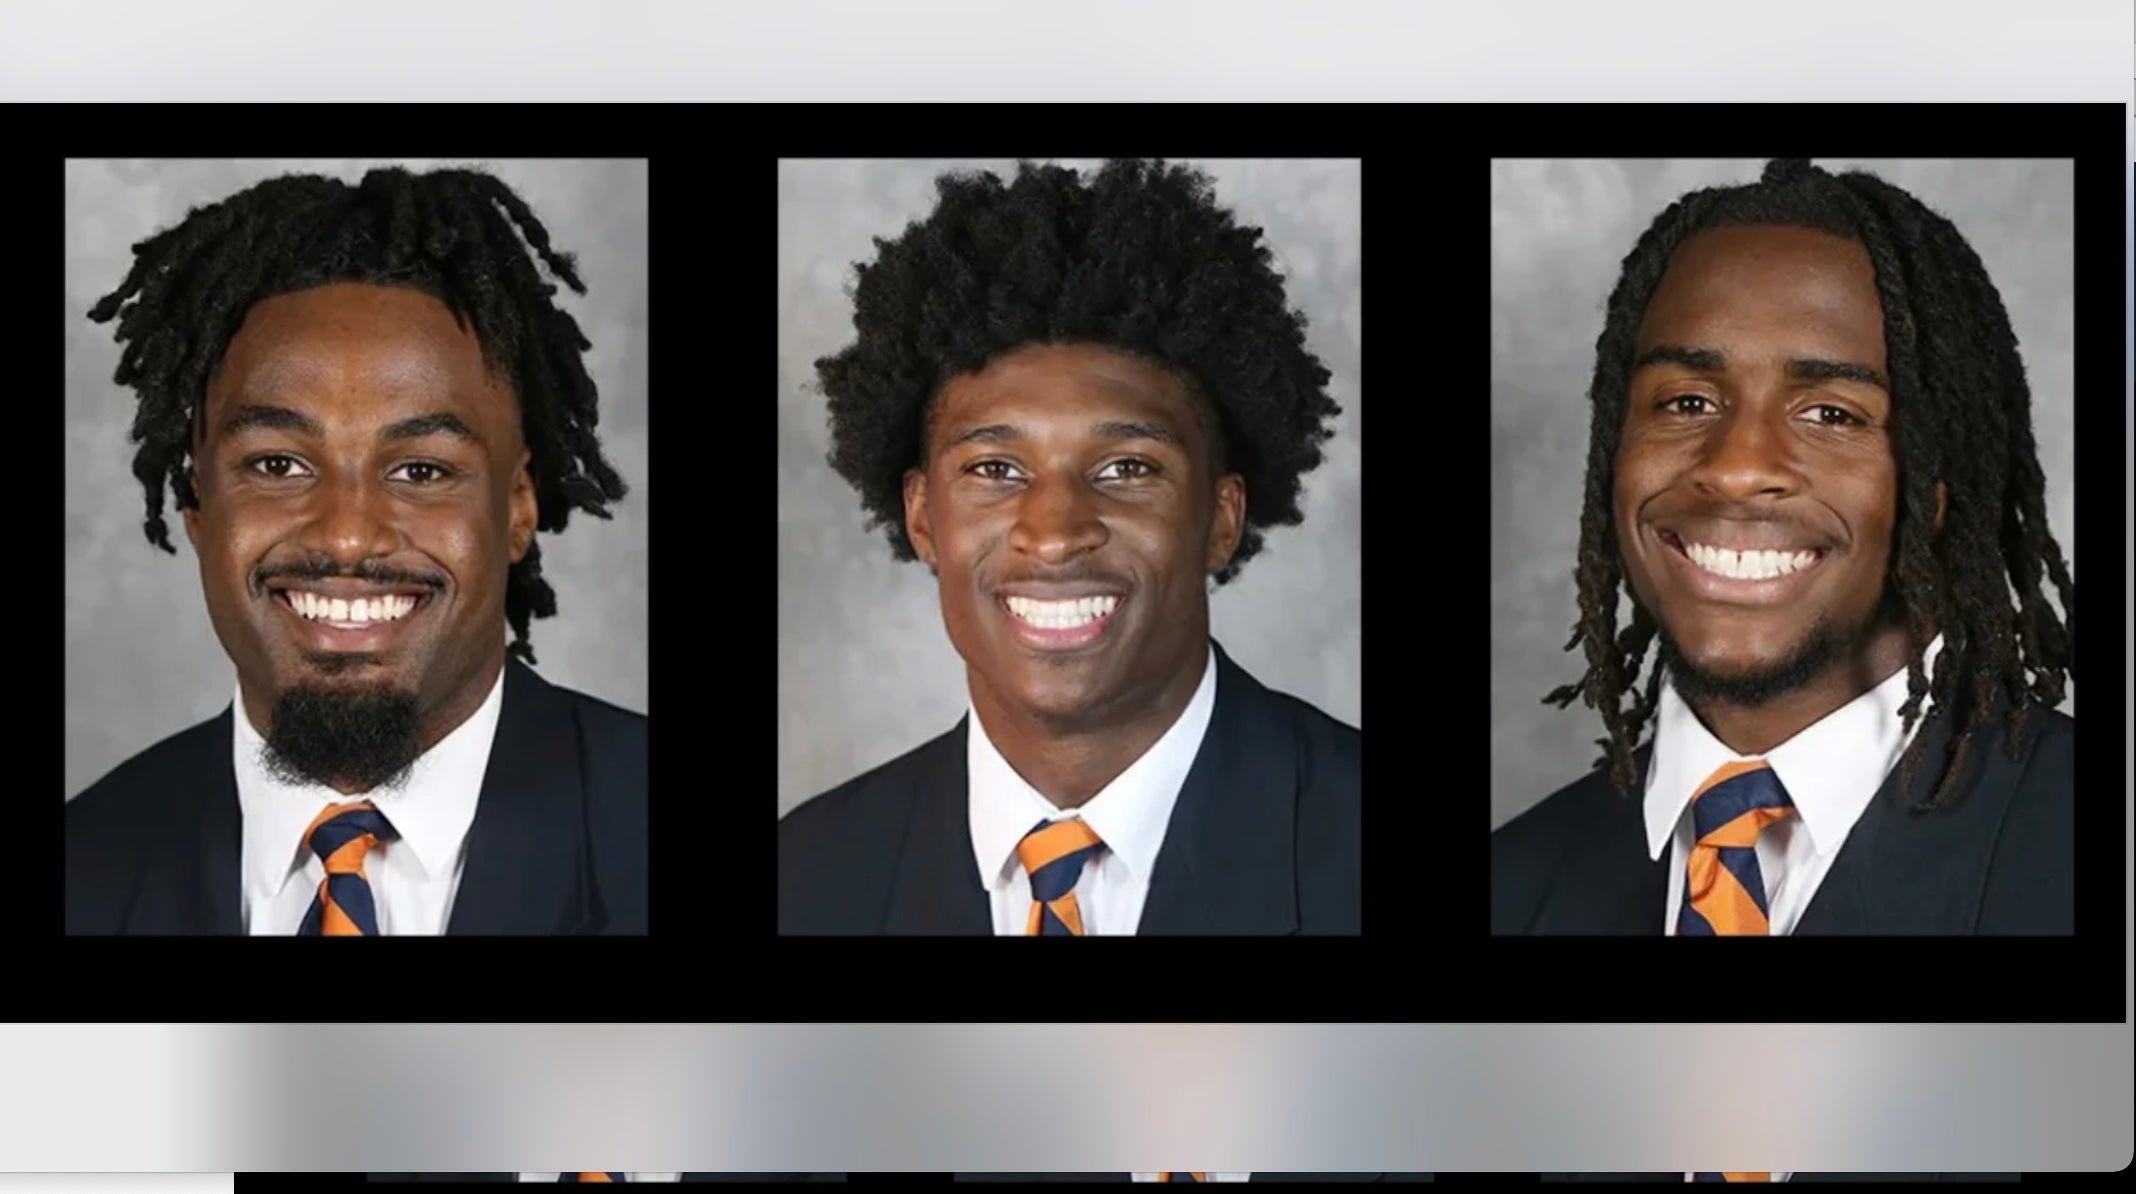 Slain UVA College Football Players Honored With Touching Tribute At The Start Of The NFL Draft